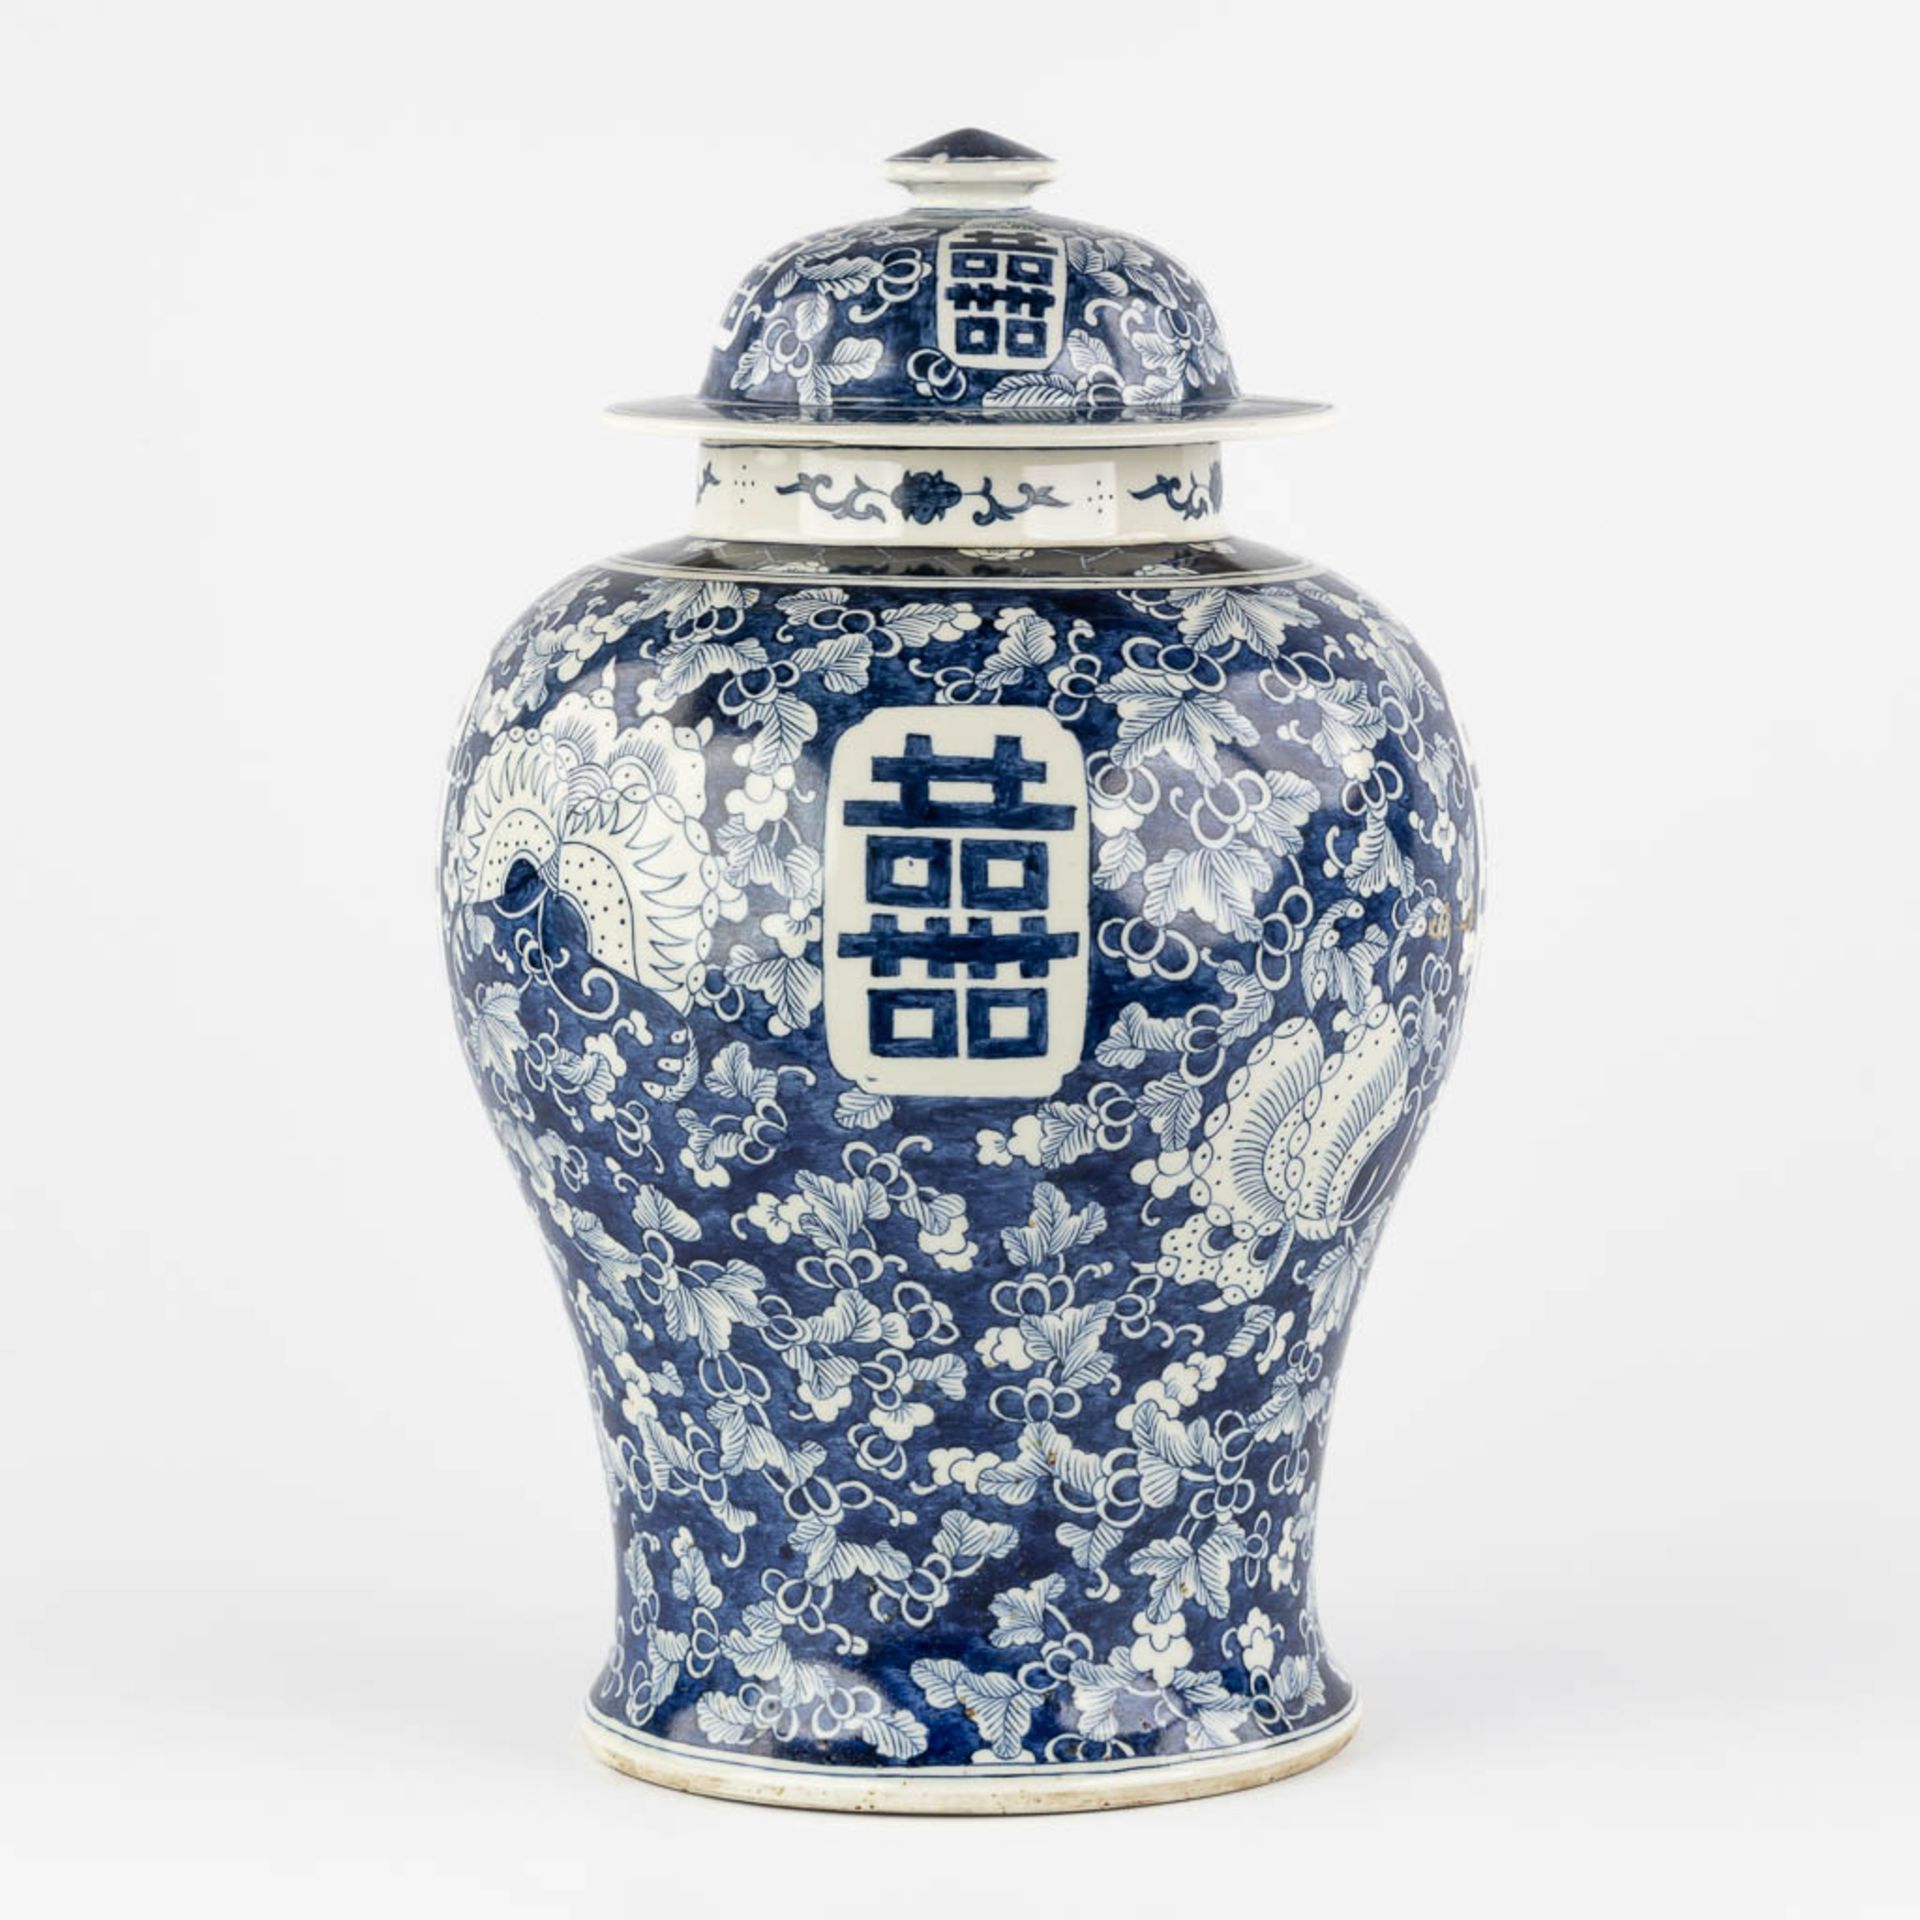 A Chinese baluster vase, blue-white with a Prunus decor and double XI sign. 19th/20th C. (H:42 x D:2 - Image 6 of 17